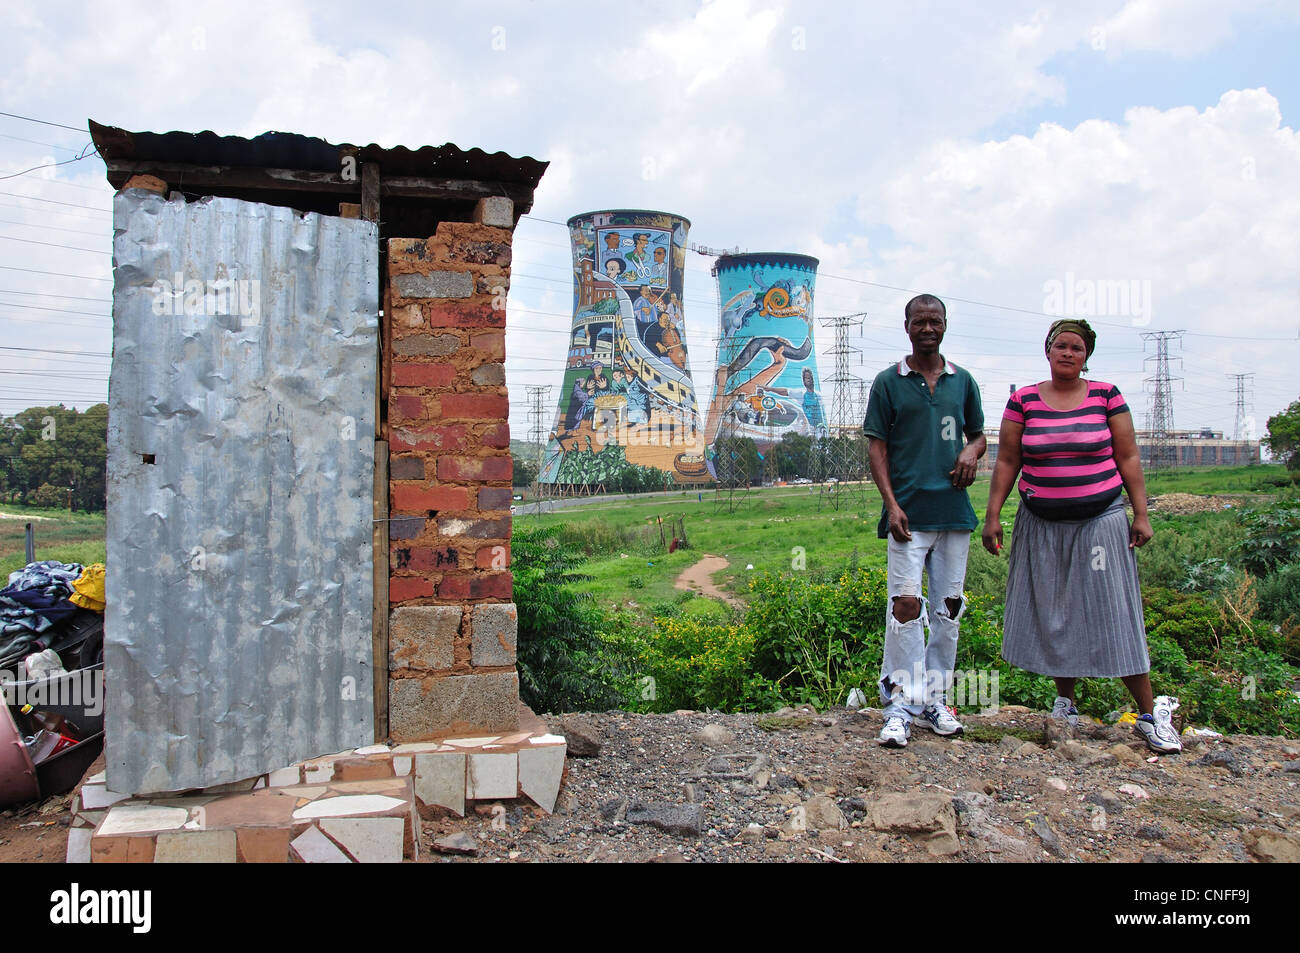 Couple in township showing outdoor toilet and Orlando Cooling Towers, Soweto, Johannesburg, Gauteng Province, Republic of South Africa Stock Photo